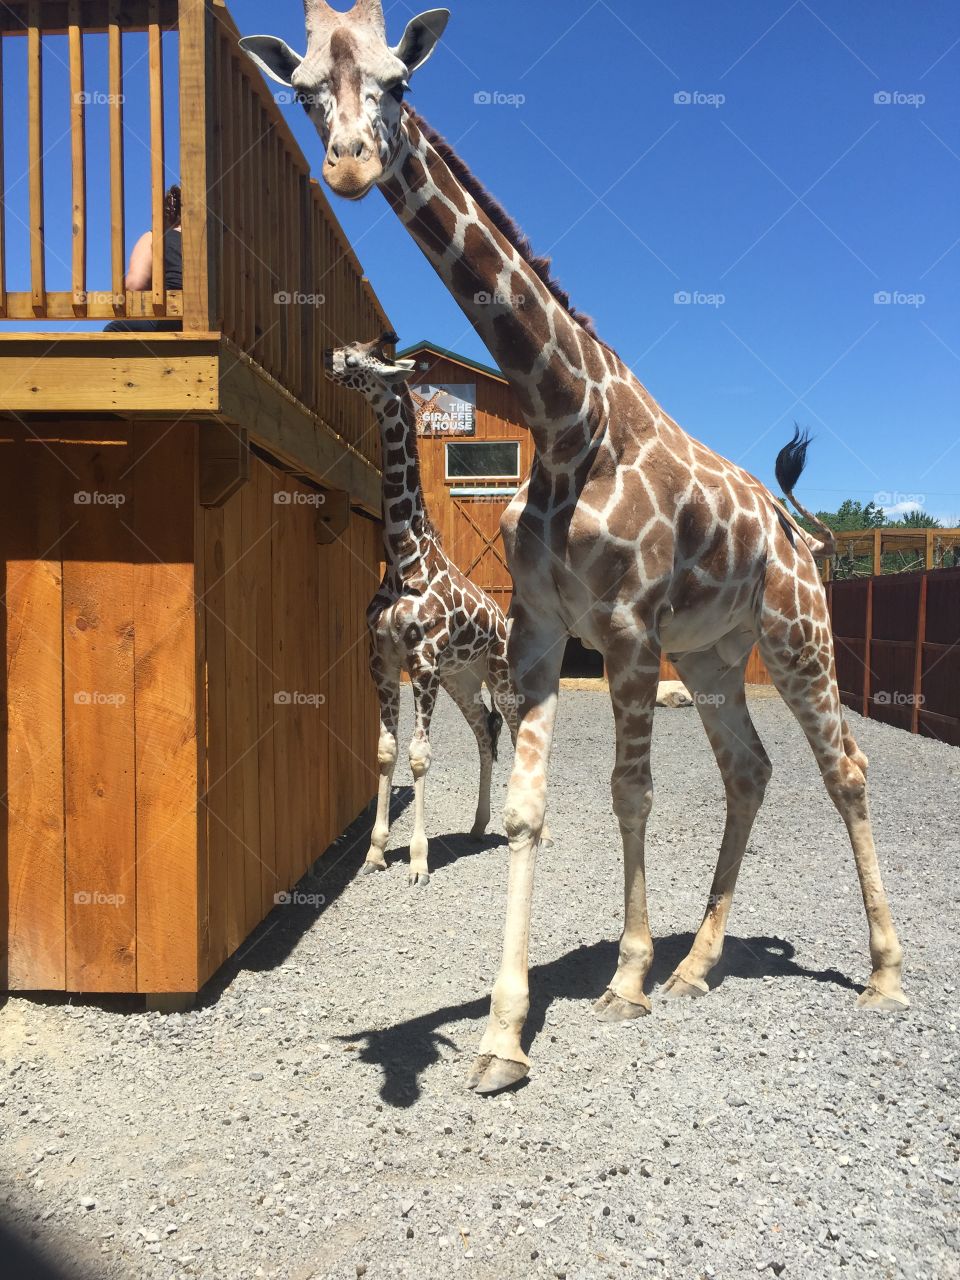 Two giraffes at Into The Wild in upstate New York